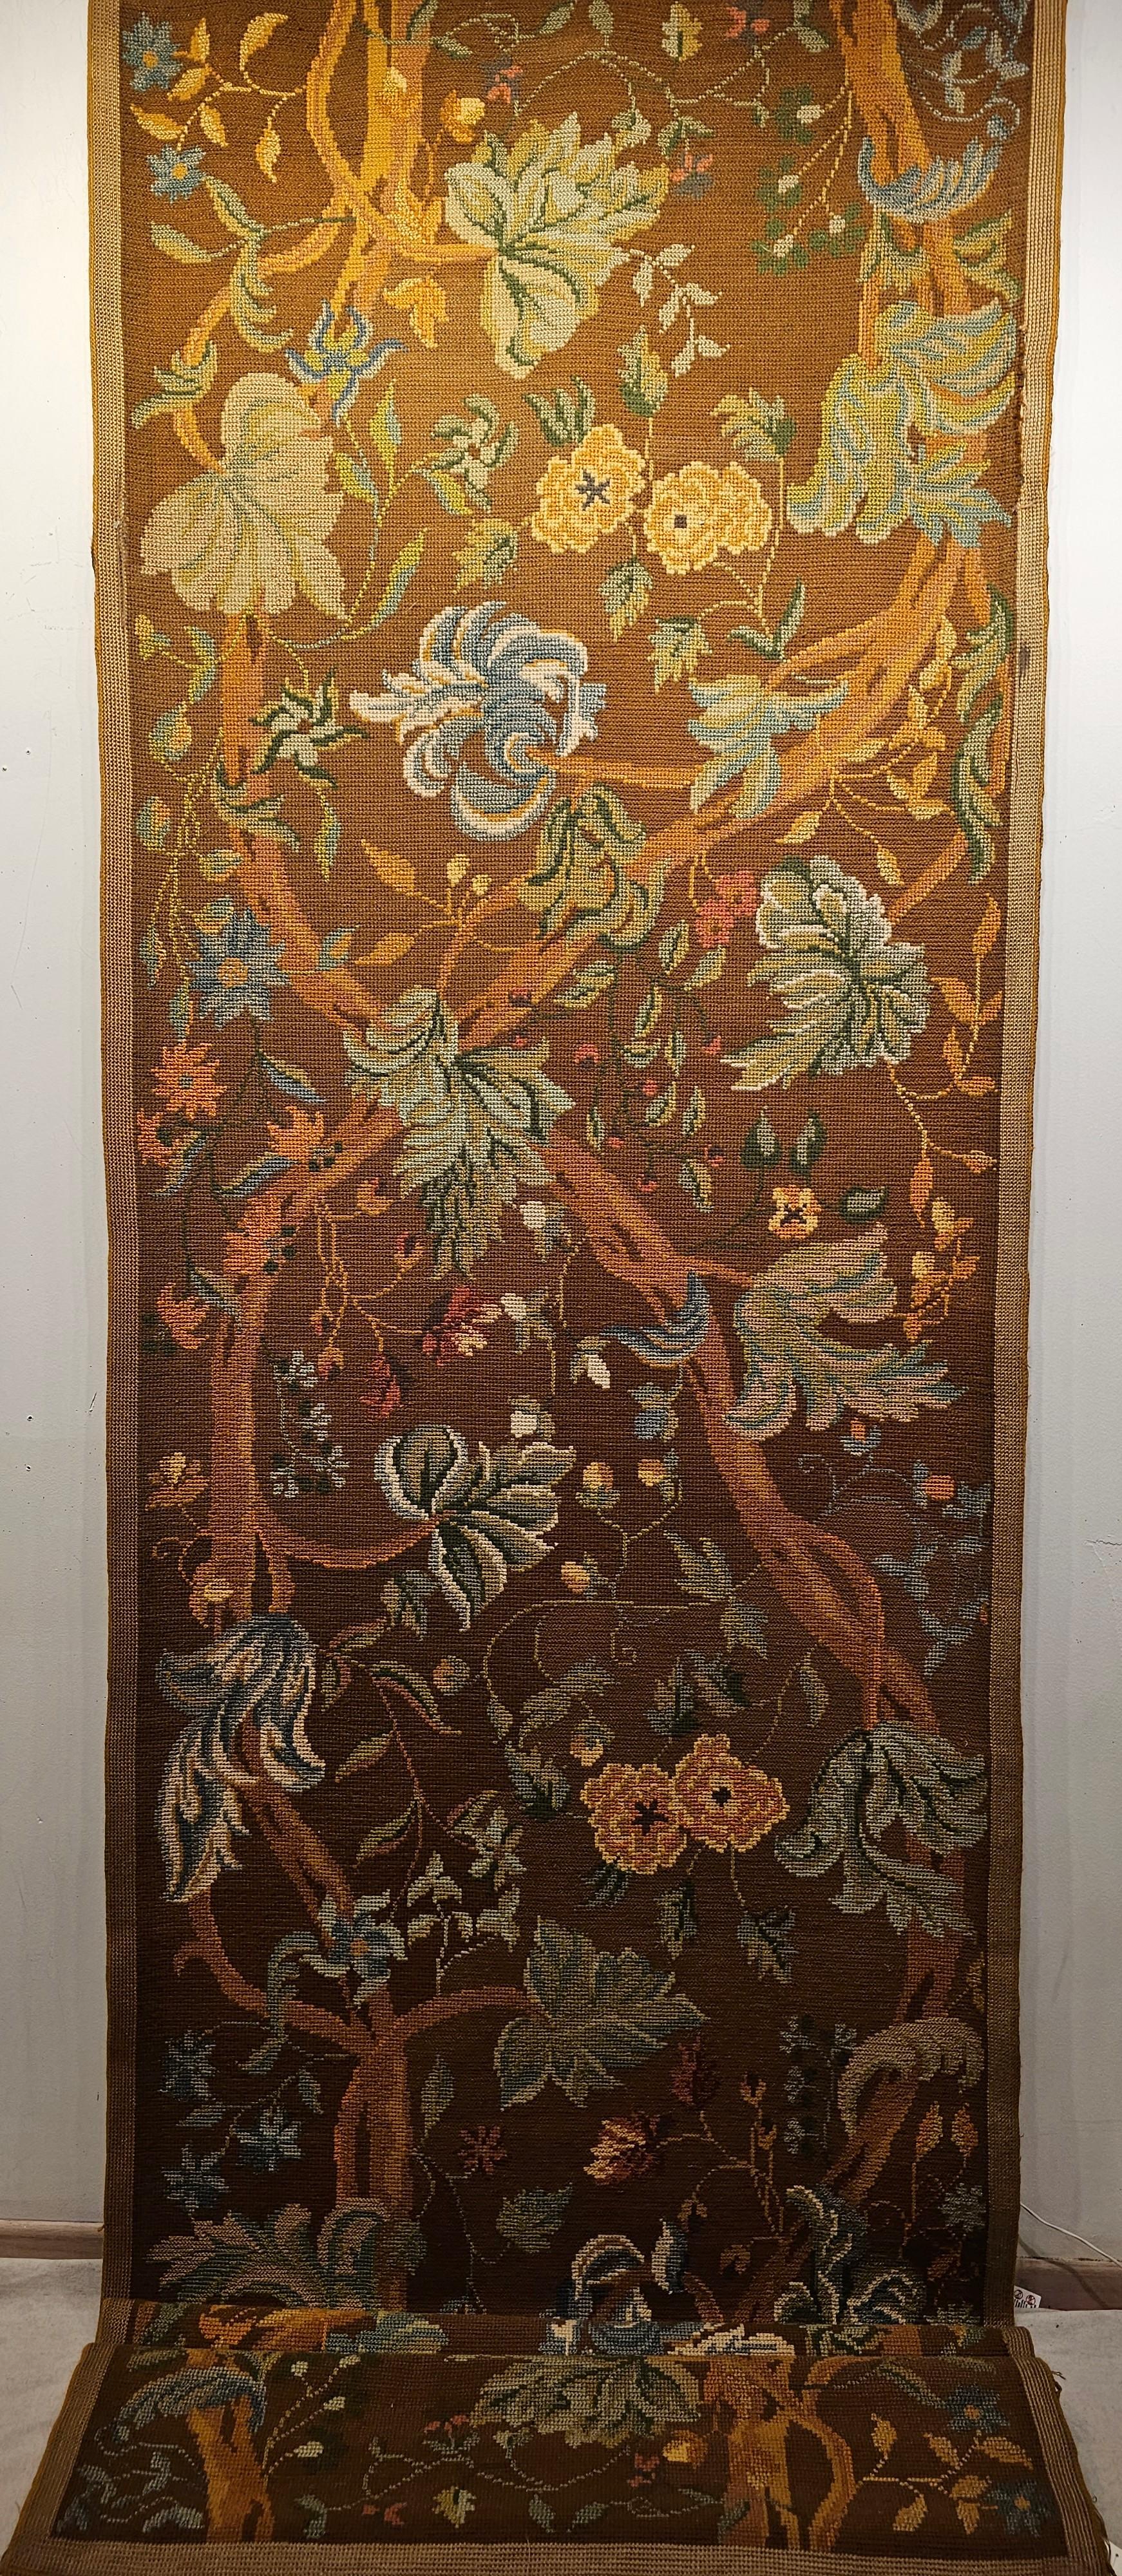  A beautiful French hand woven Needlepoint runner from the early 1900s.  The Needlepoint has a  symmetric design depicting trees emanating toward the heavens with curving branches that have color full leaves with various shades of green, blue,